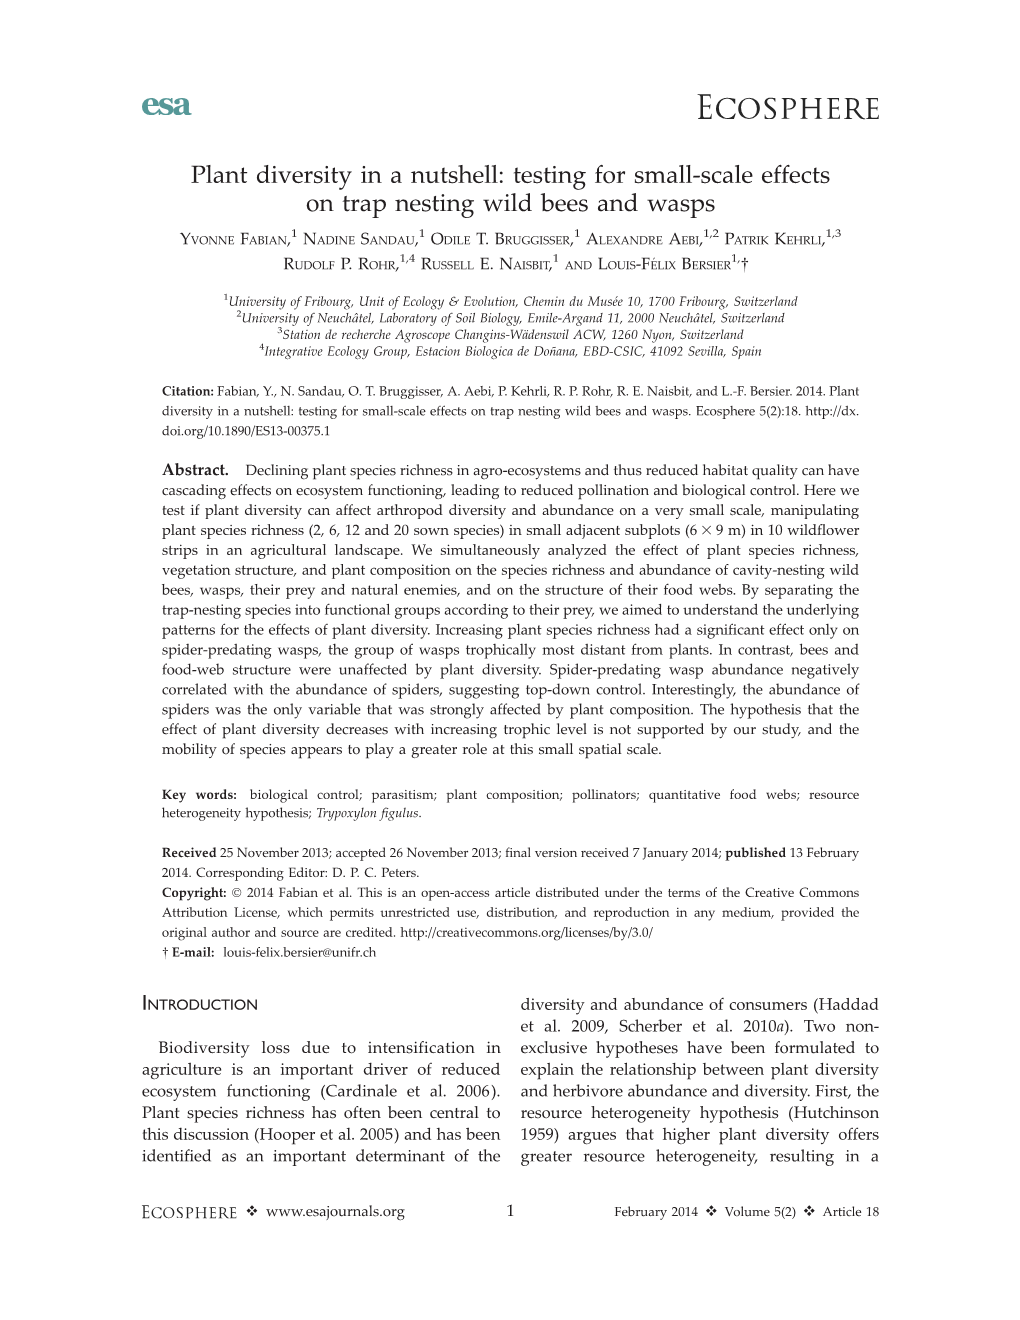 Plant Diversity in a Nutshell: Testing for Small-Scale Effects on Trap Nesting Wild Bees and Wasps 1 1 1 1,2 1,3 YVONNE FABIAN, NADINE SANDAU, ODILE T